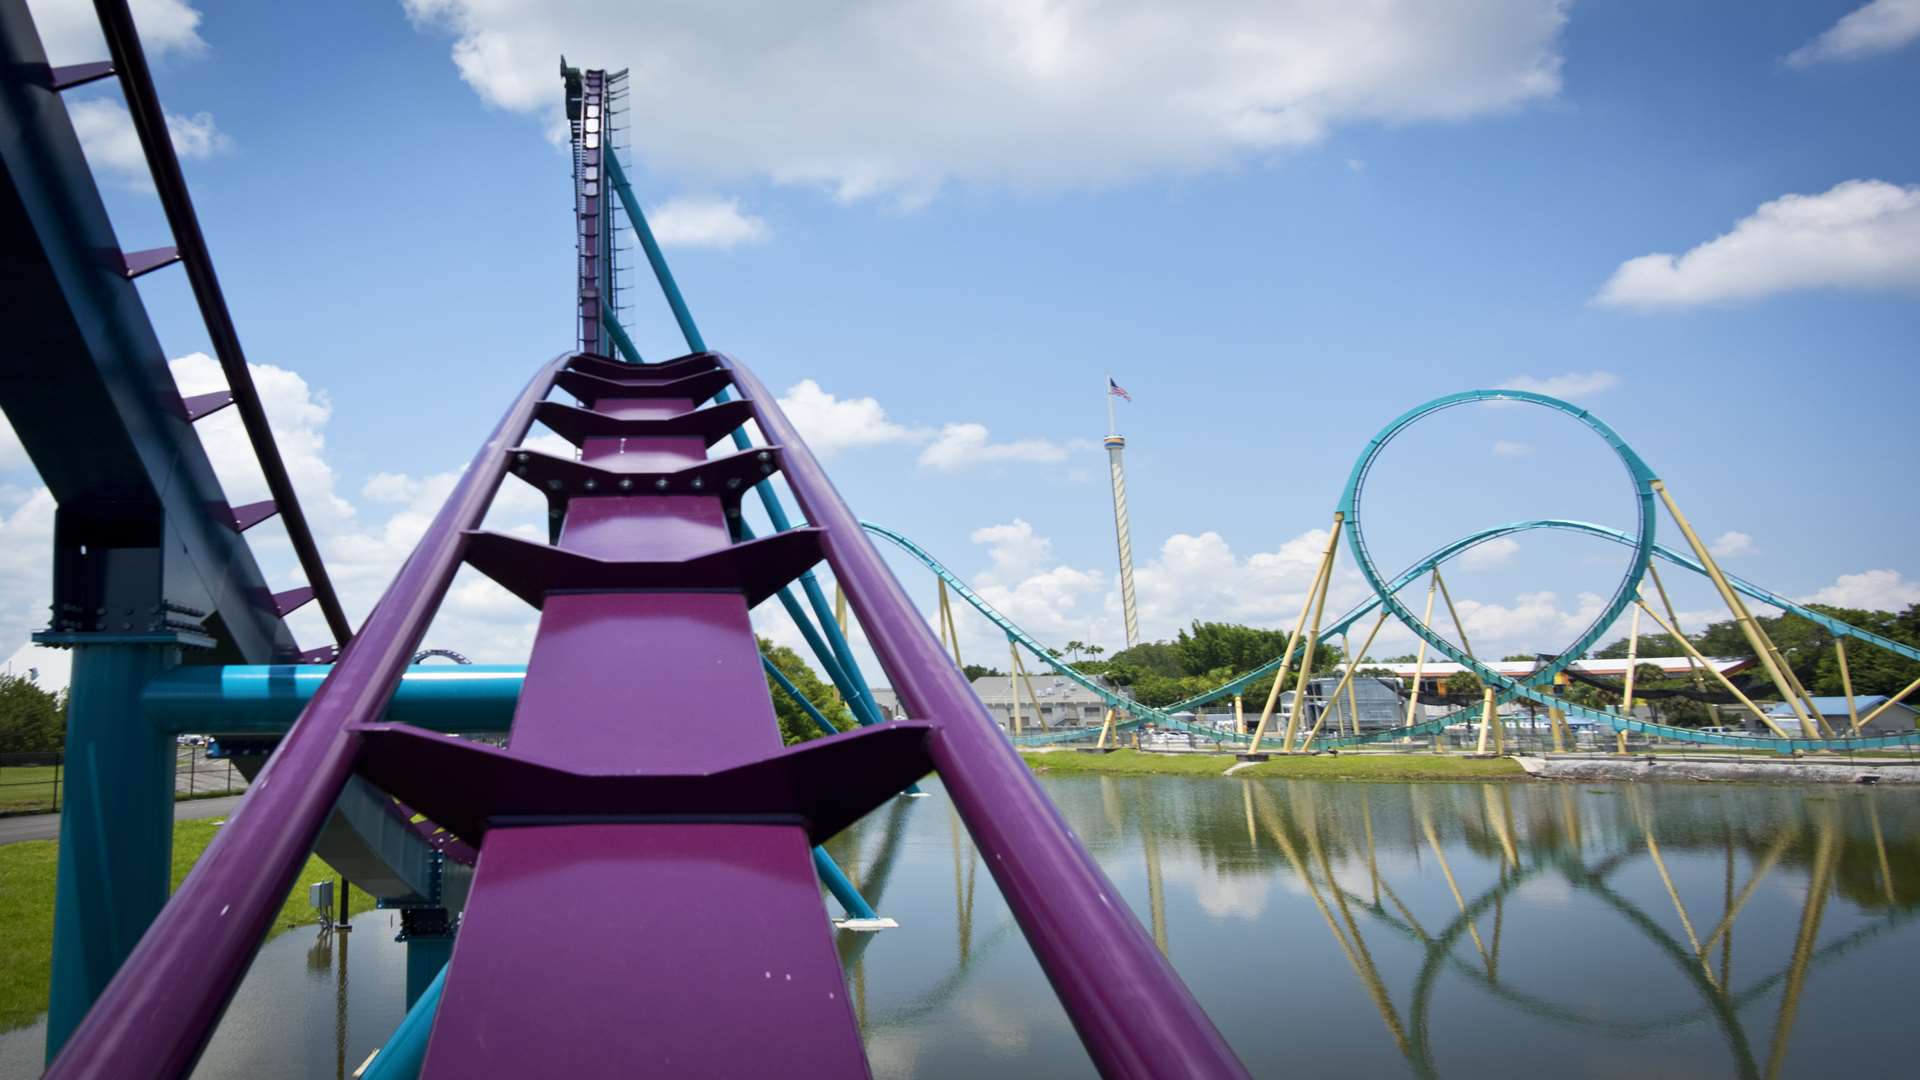 Mako - Orlando's tallest, fastest and longester rollercoasters